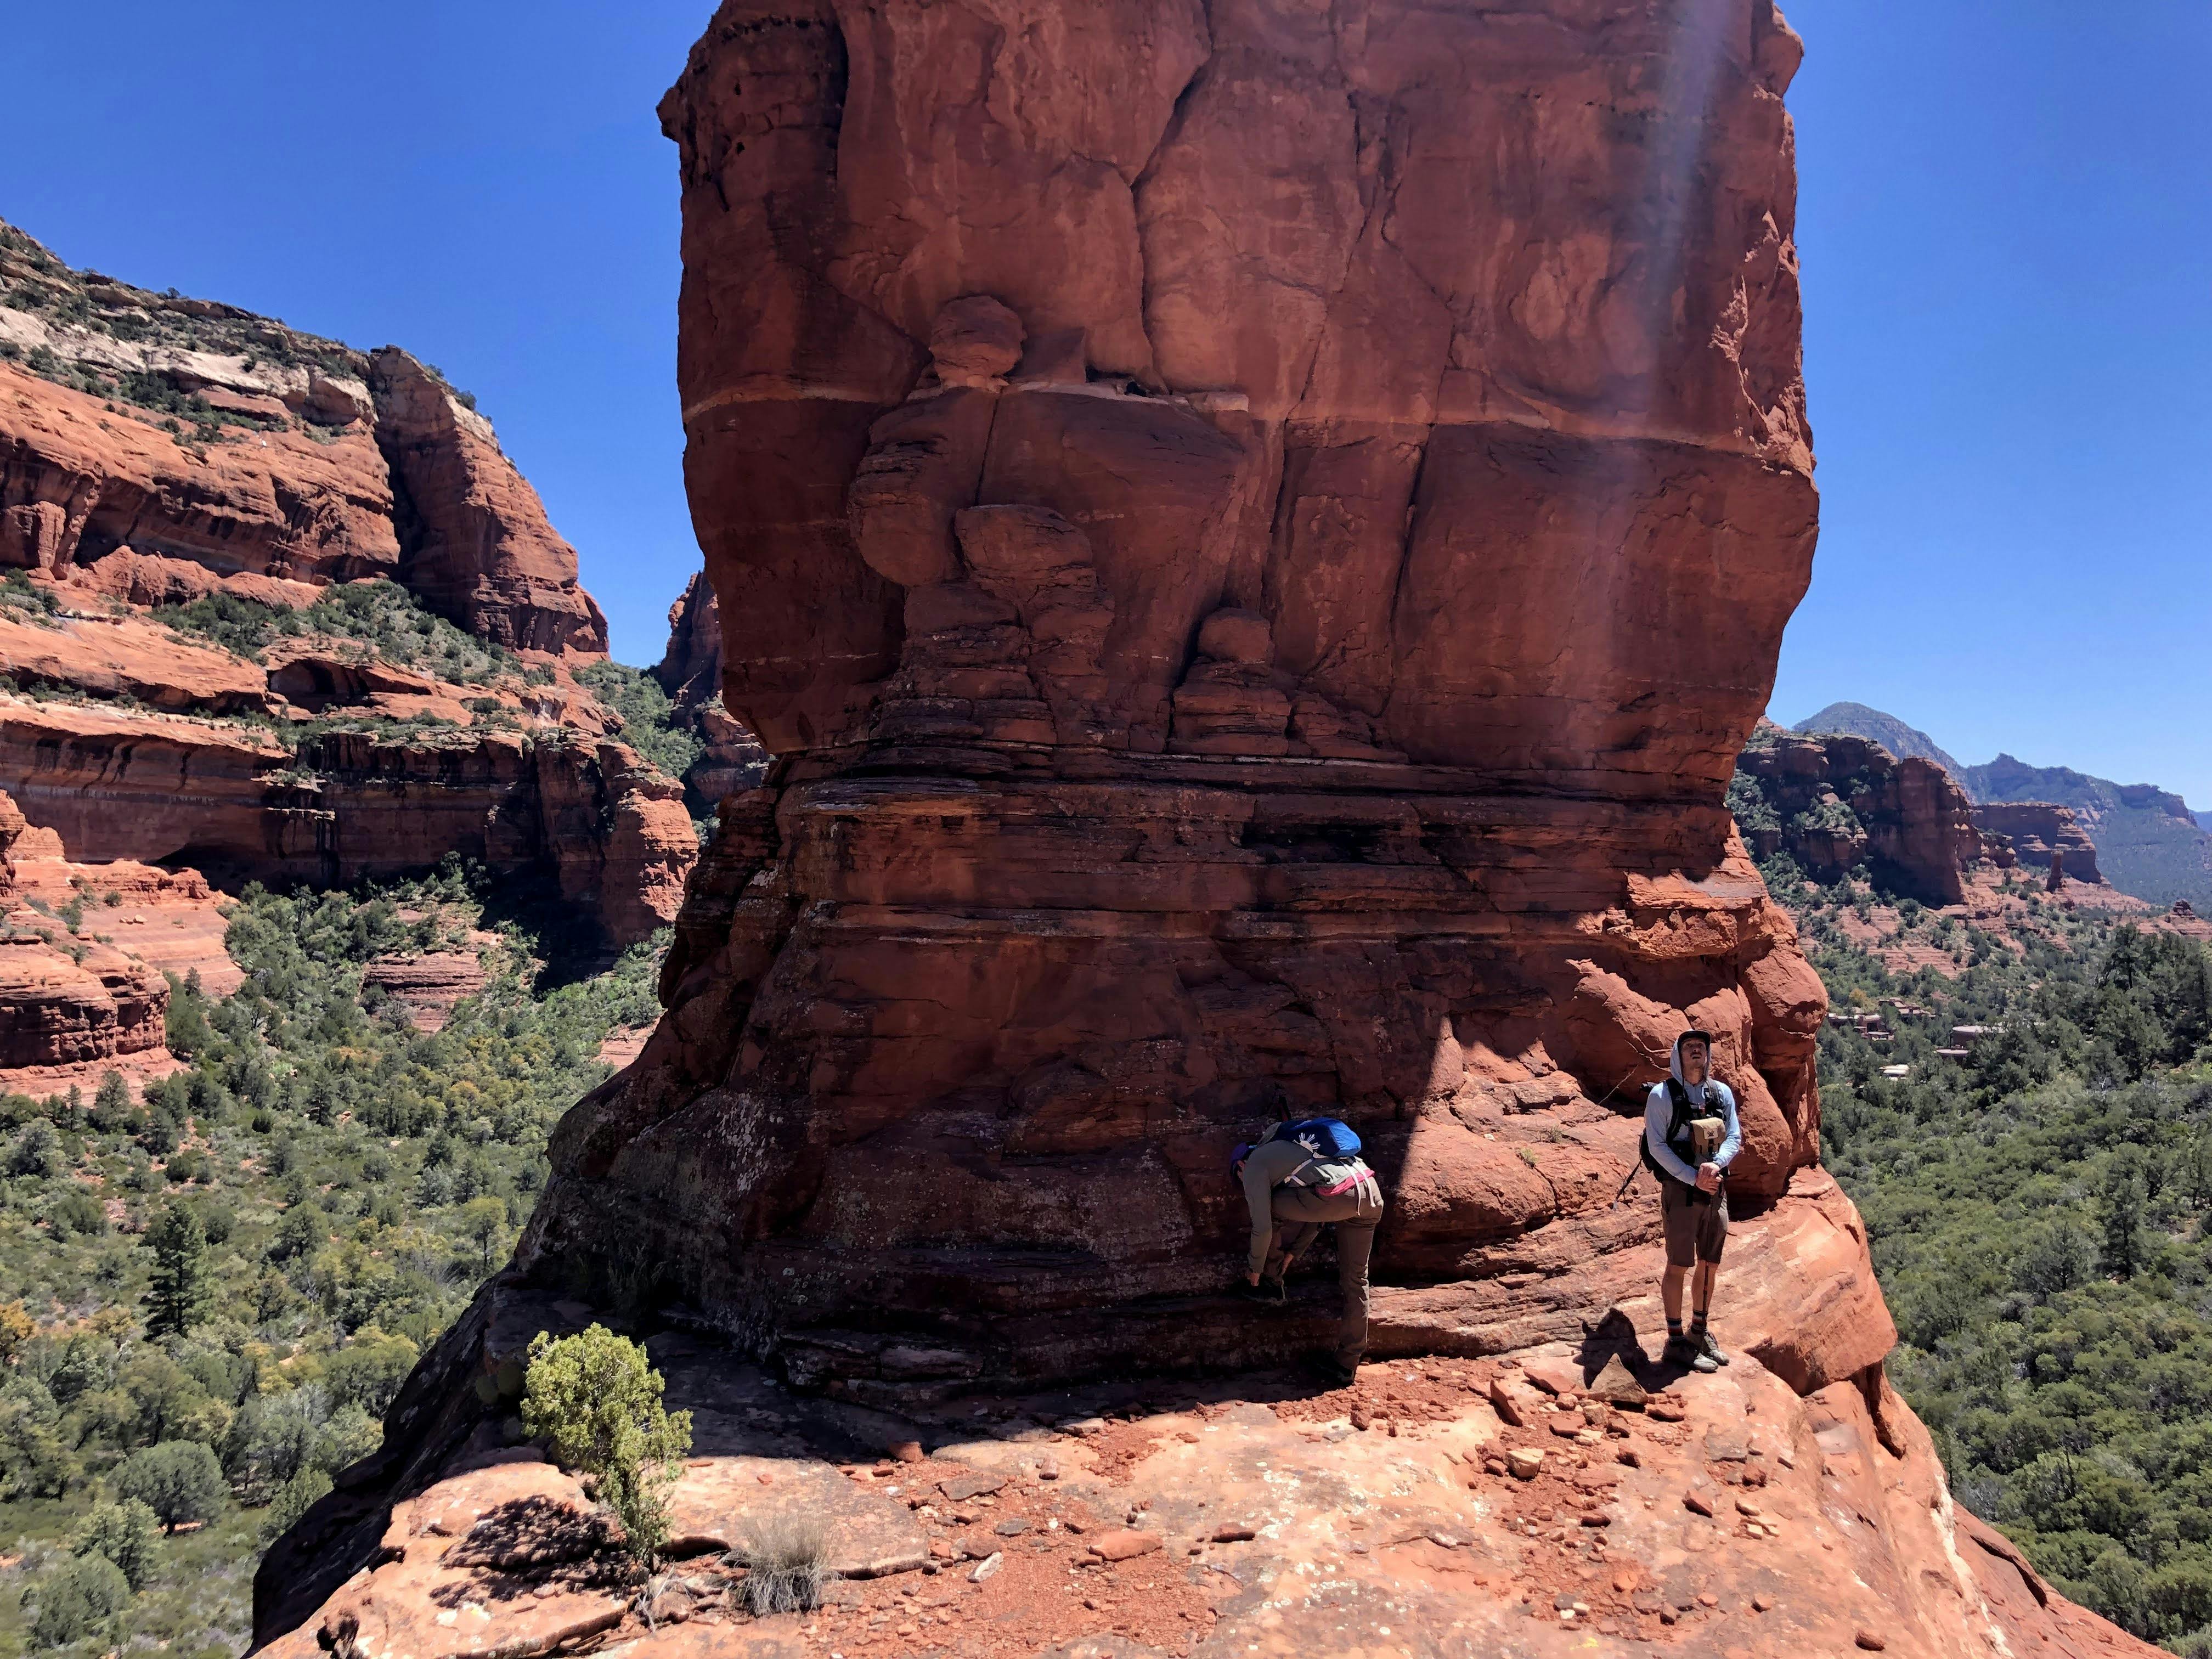 Two hikers stand next to a large rock formation in the canyon